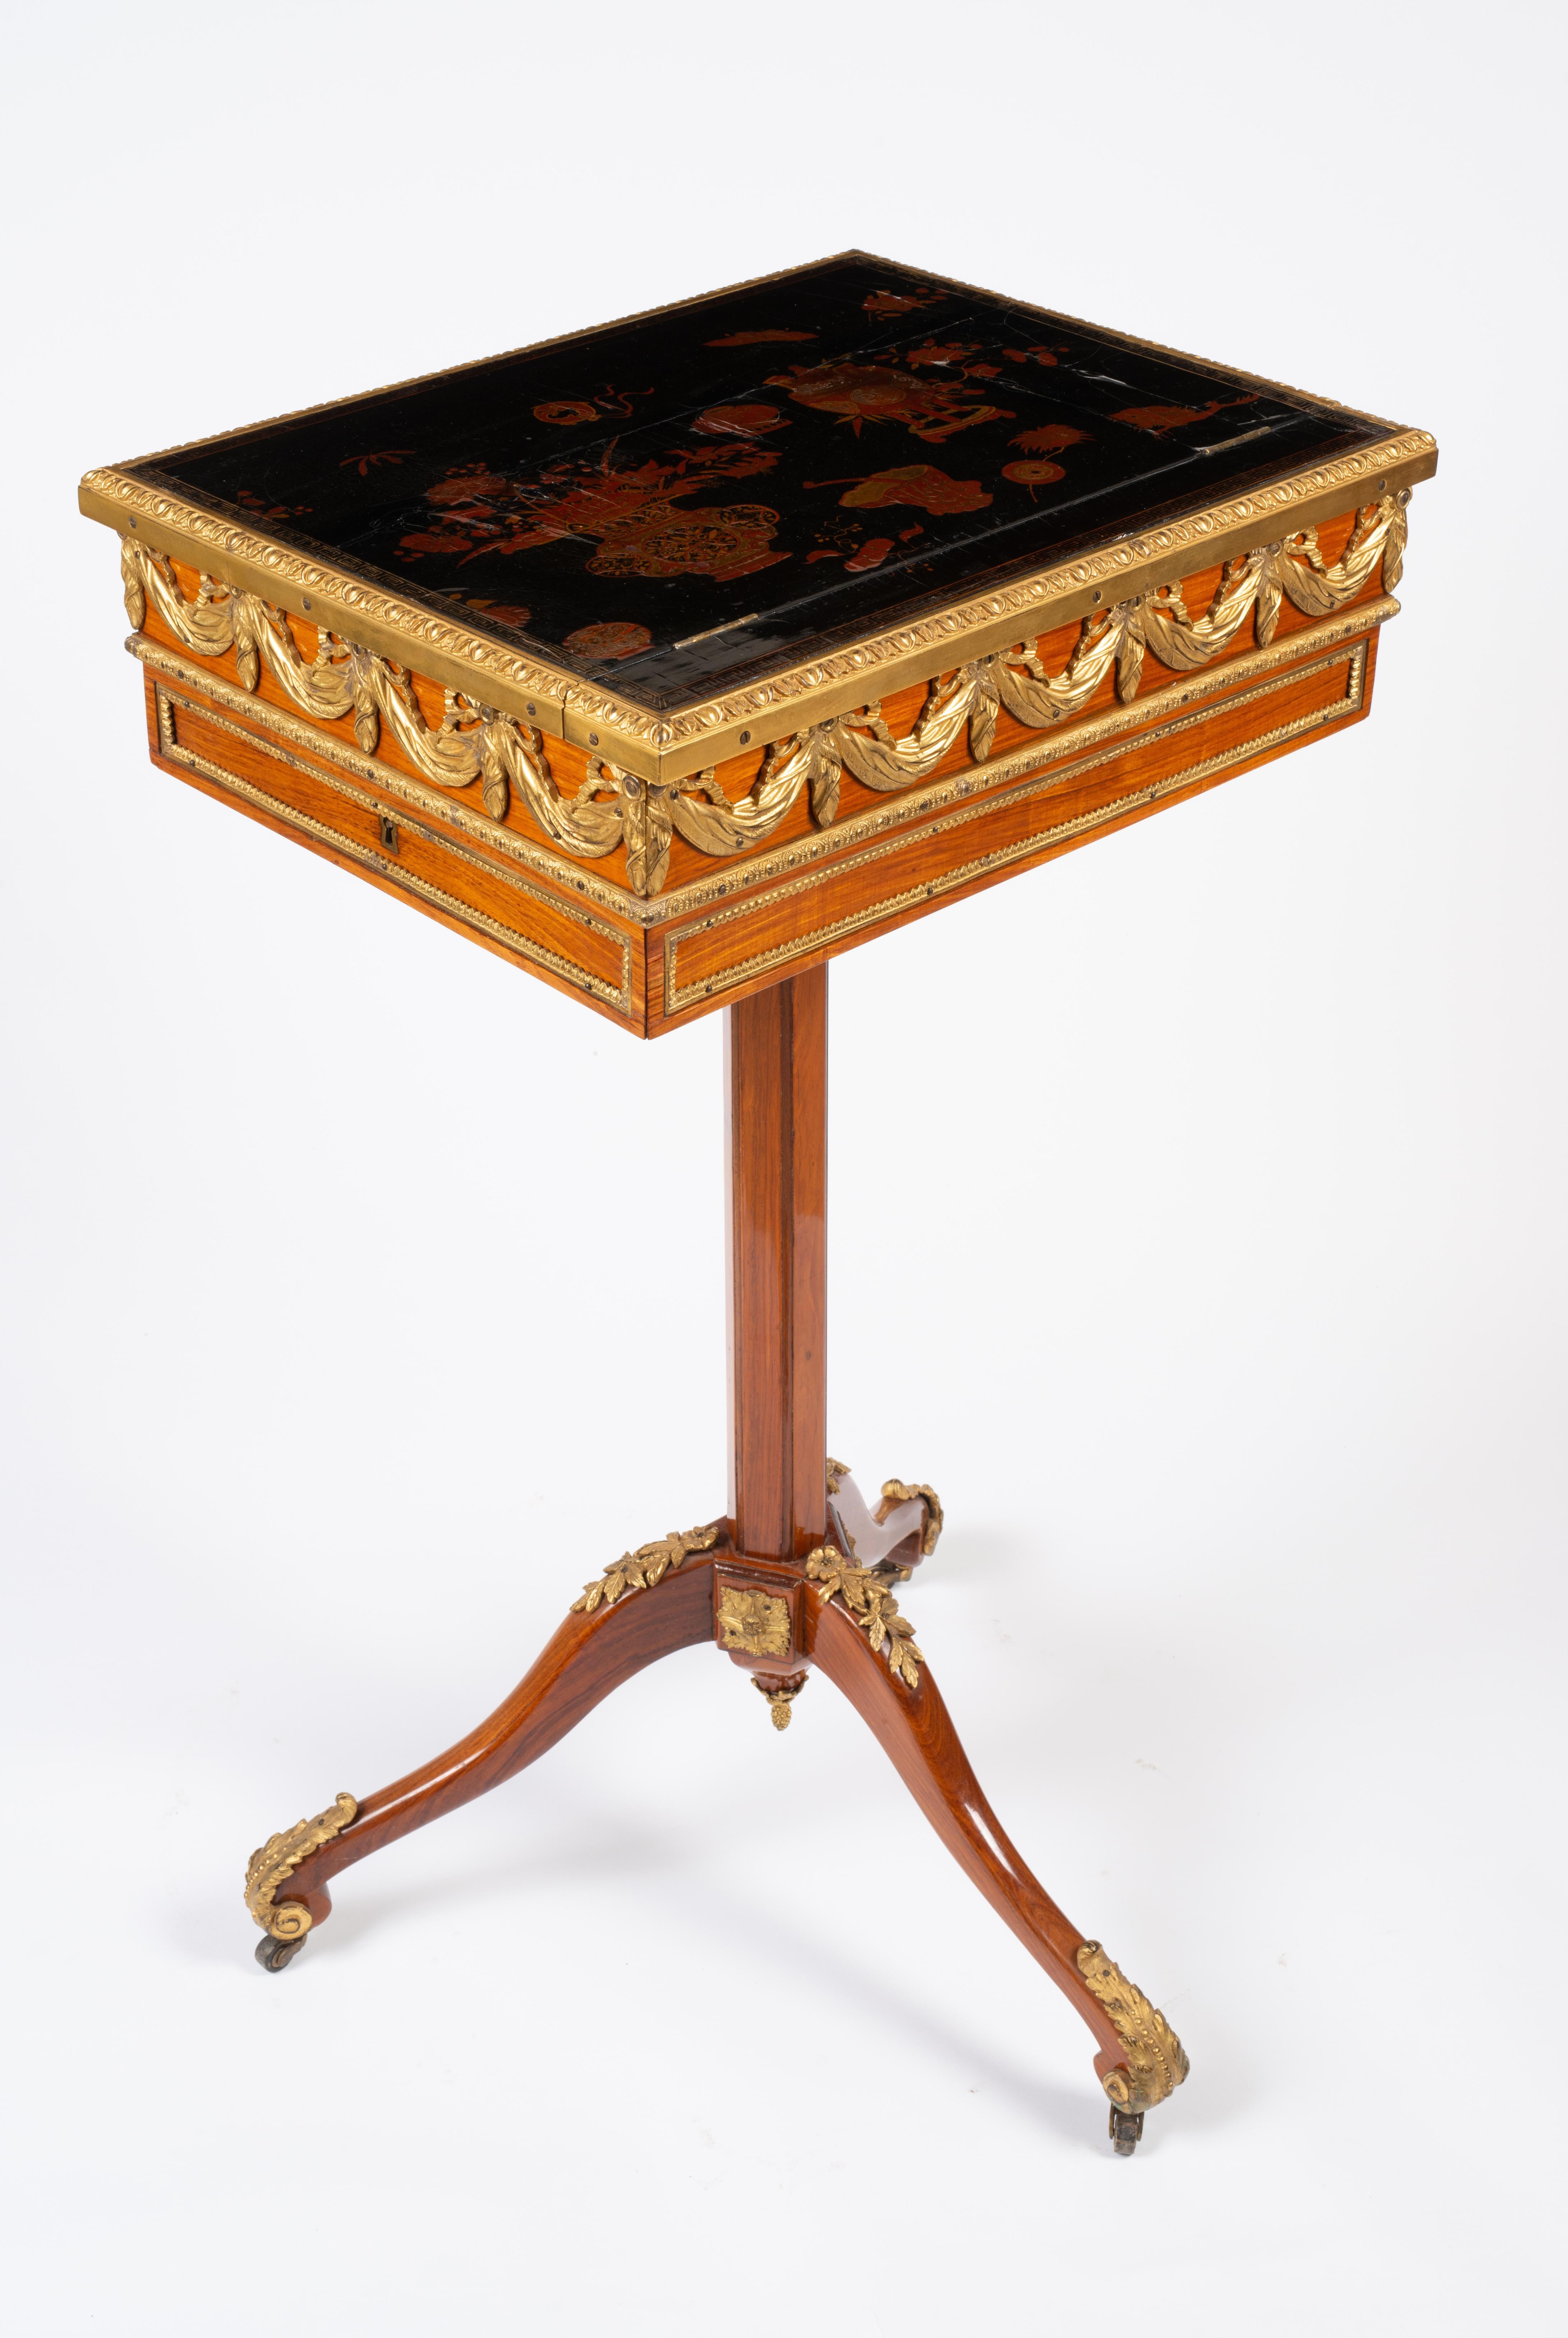 Louis XVI Style Gilt Bronze Tulipwood and Lacquer Mechanical Table For Sale 2